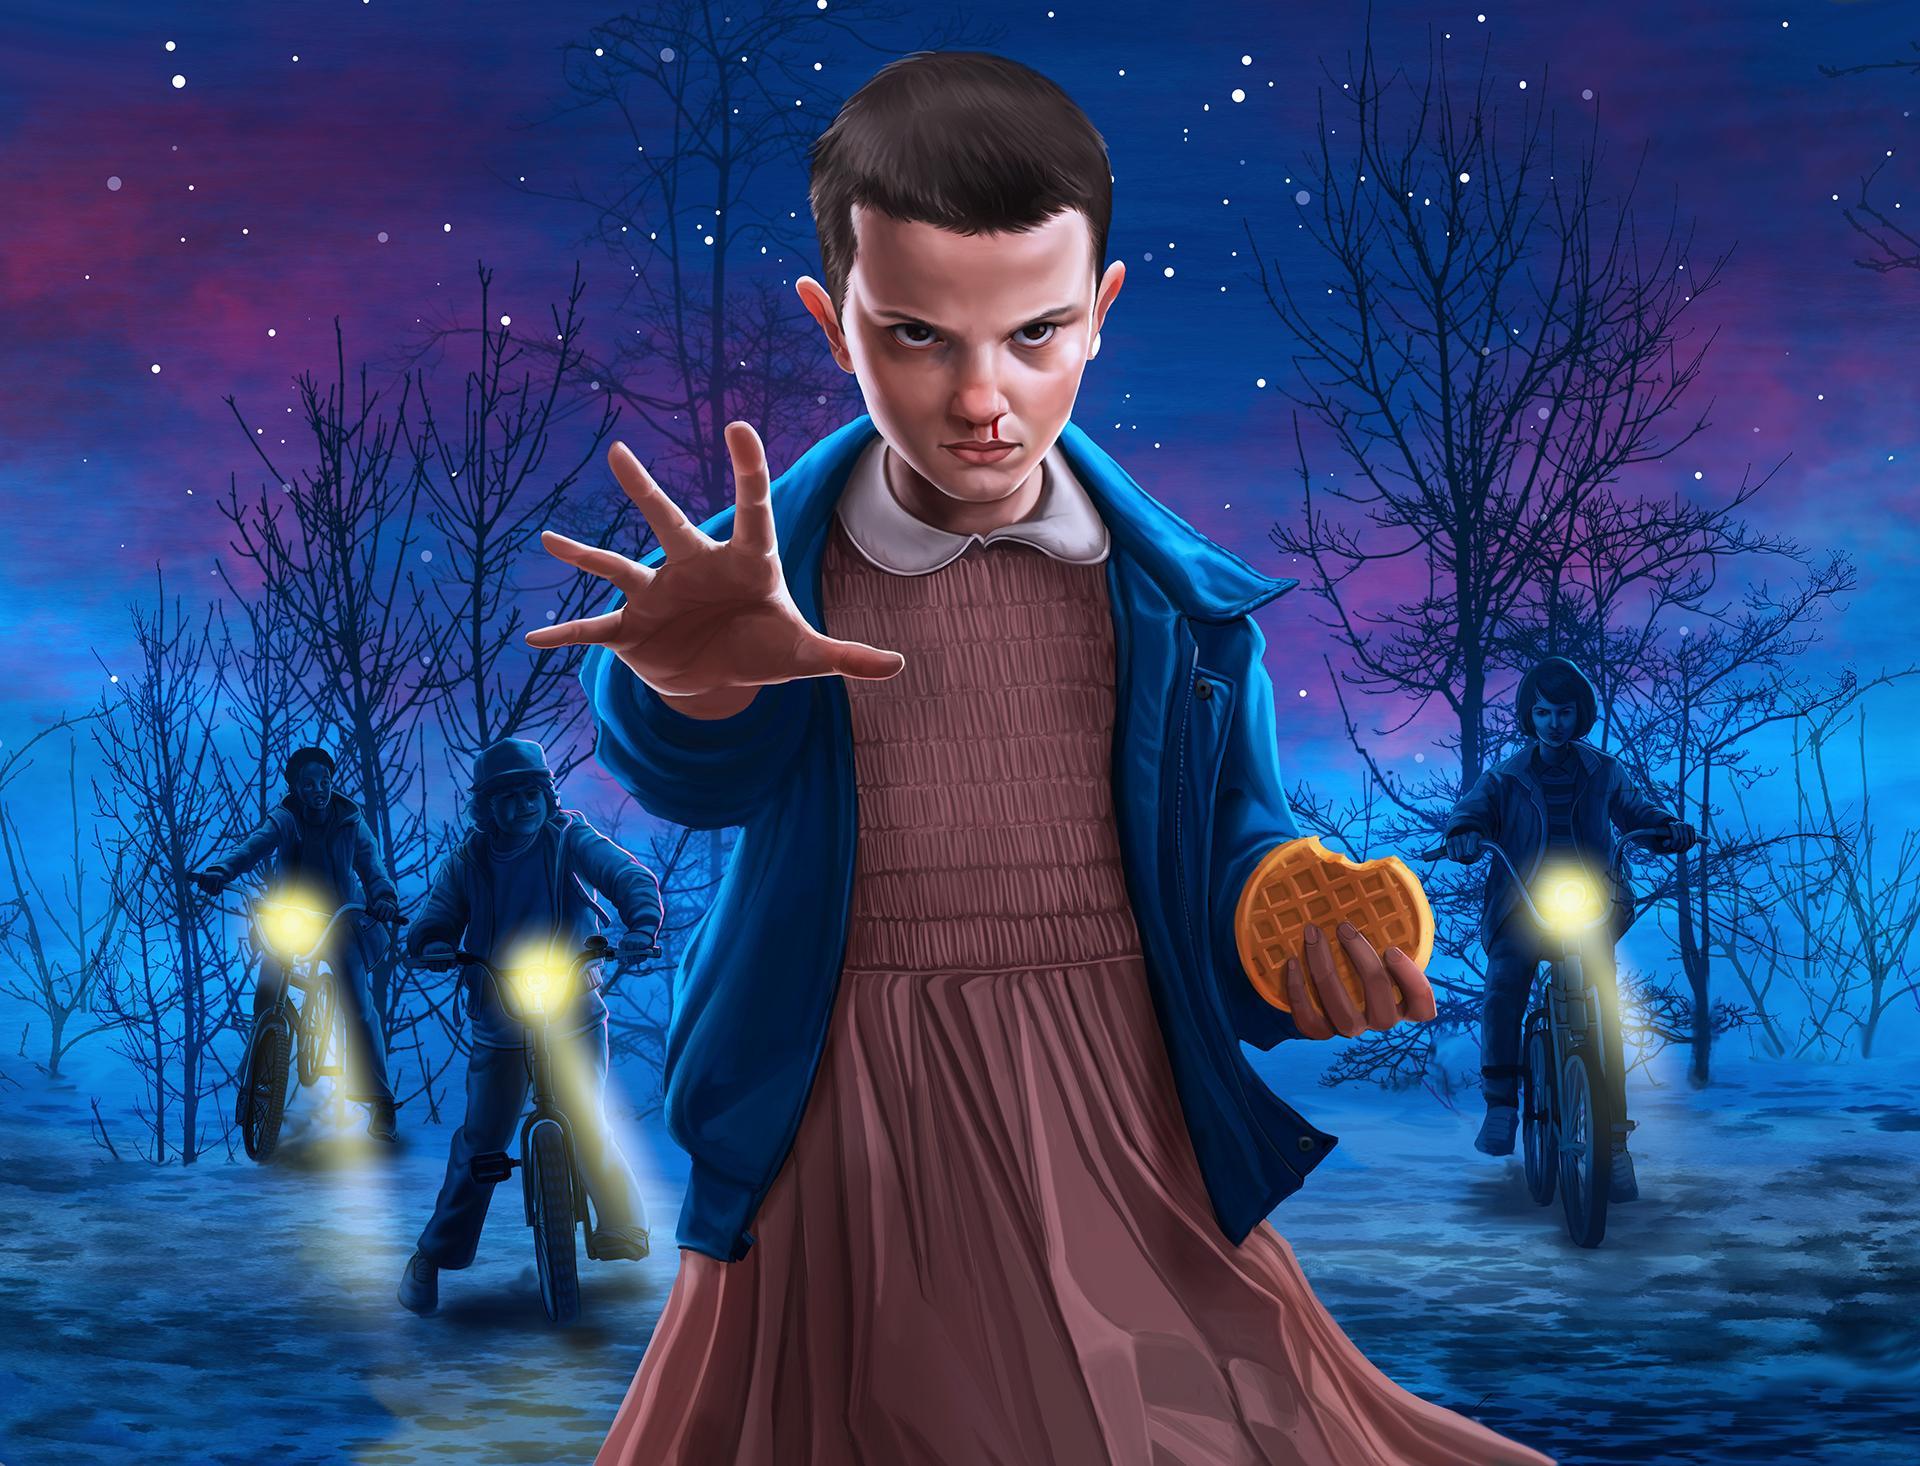 Stranger Things Eleven And Mike Wallpapers - Wallpaper Cave